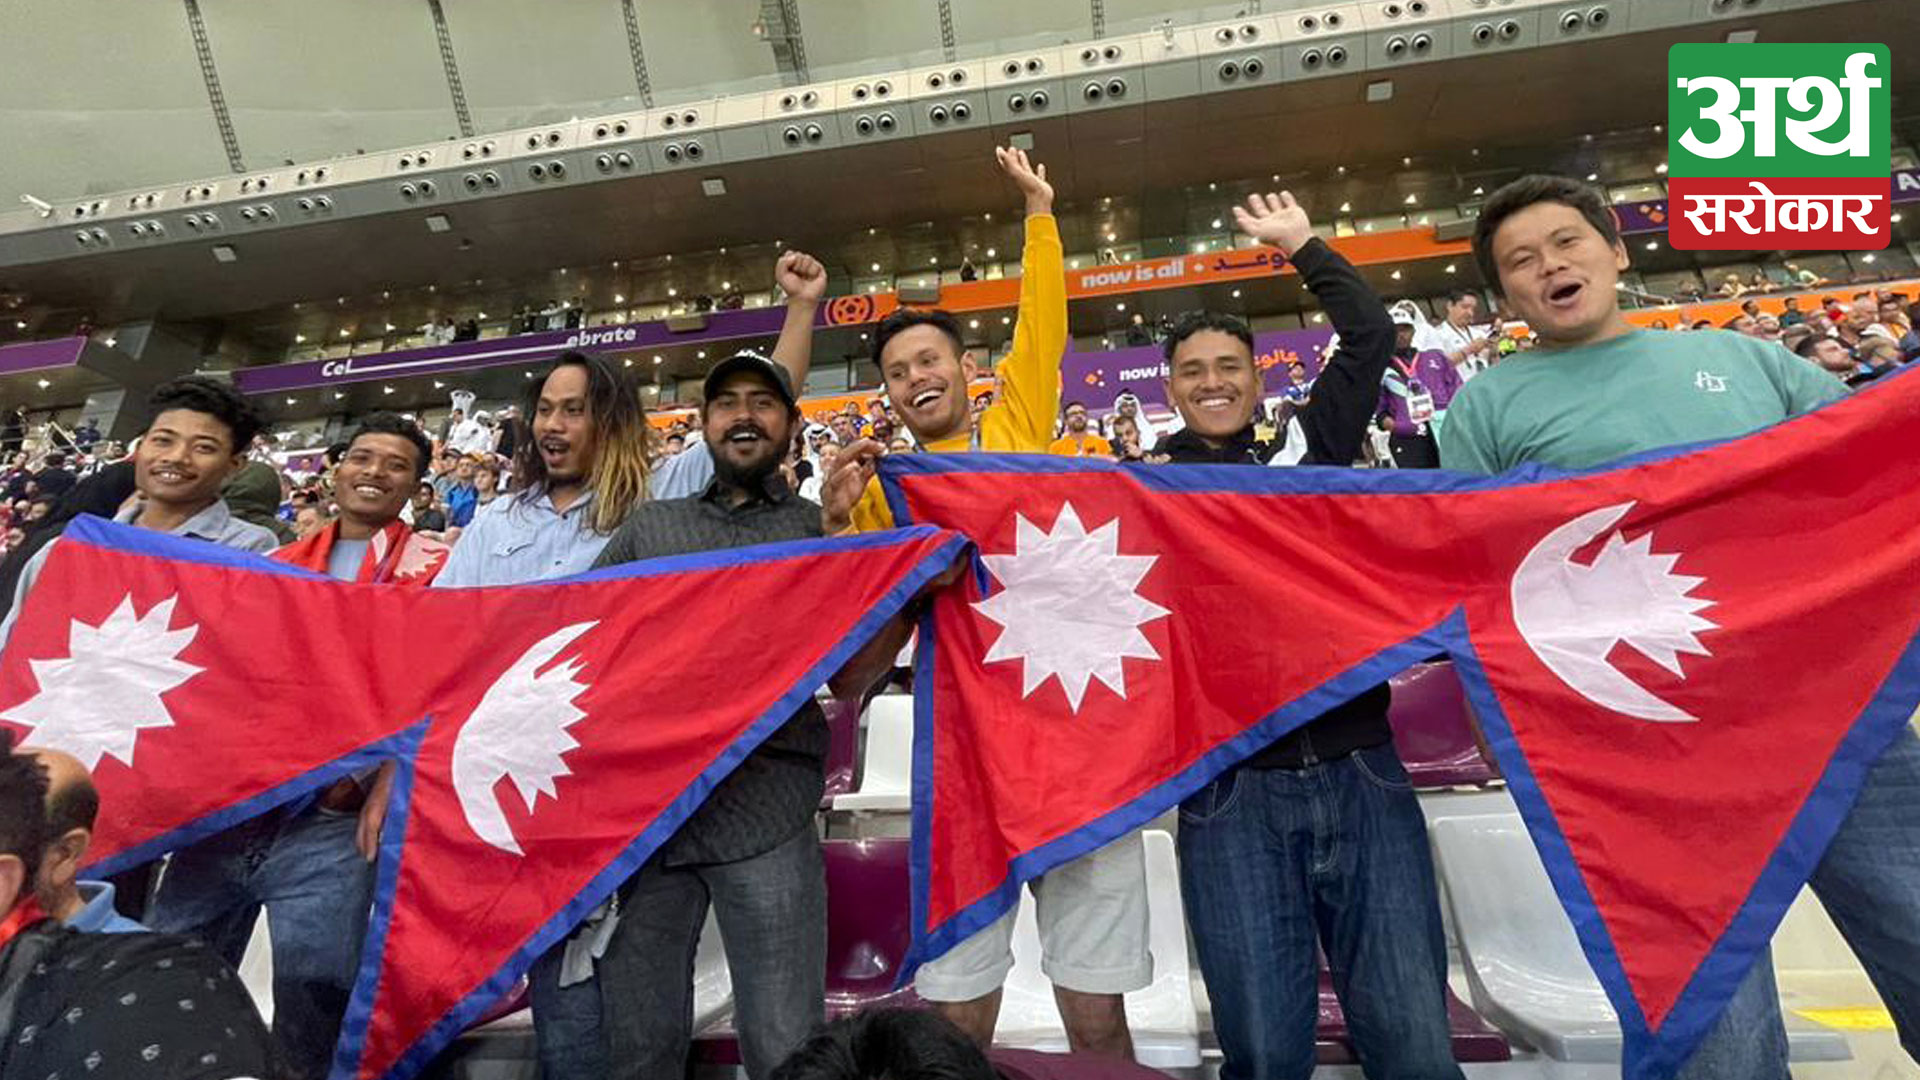 Coca-Cola shares FIFA World Cup Experience with Nepali Migrant Workers in Qatar